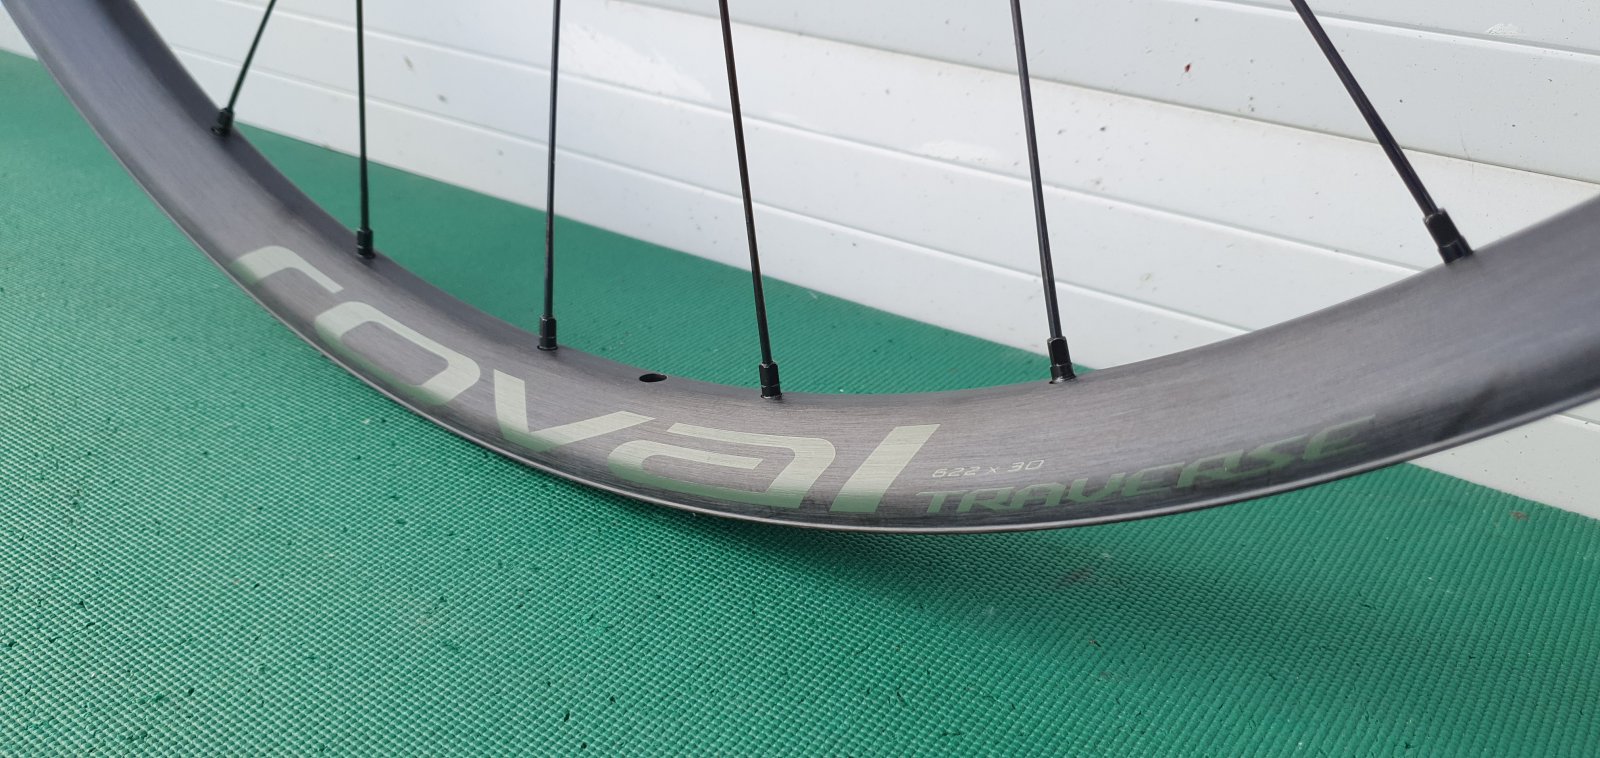 specialized roval traverse carbon 148 wheelset